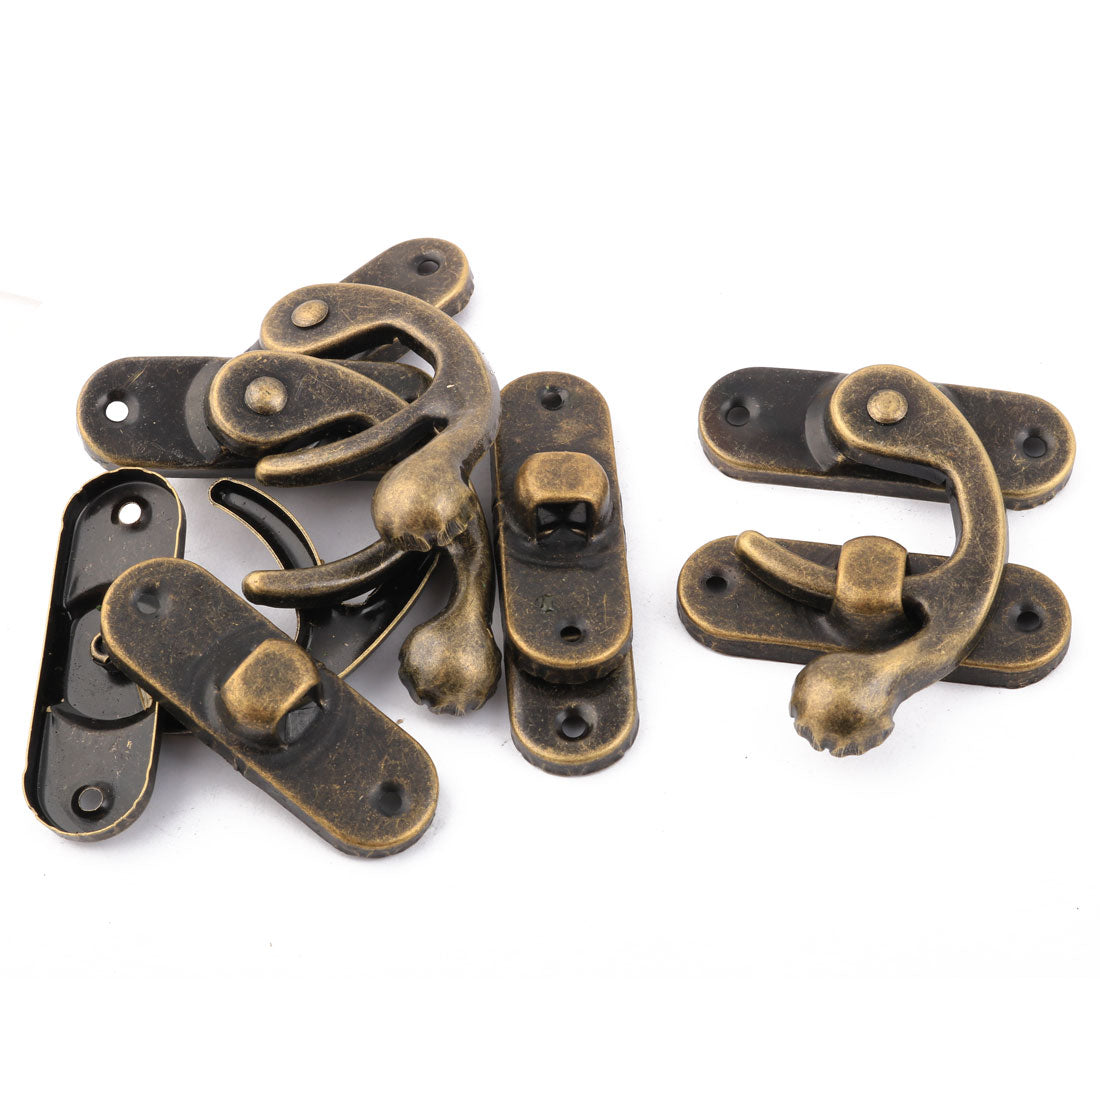 uxcell Uxcell Metal Jewelry Case Chest Lock Buckle Clasp Closure Hasp Box Latch Bronze Tone 4pcs